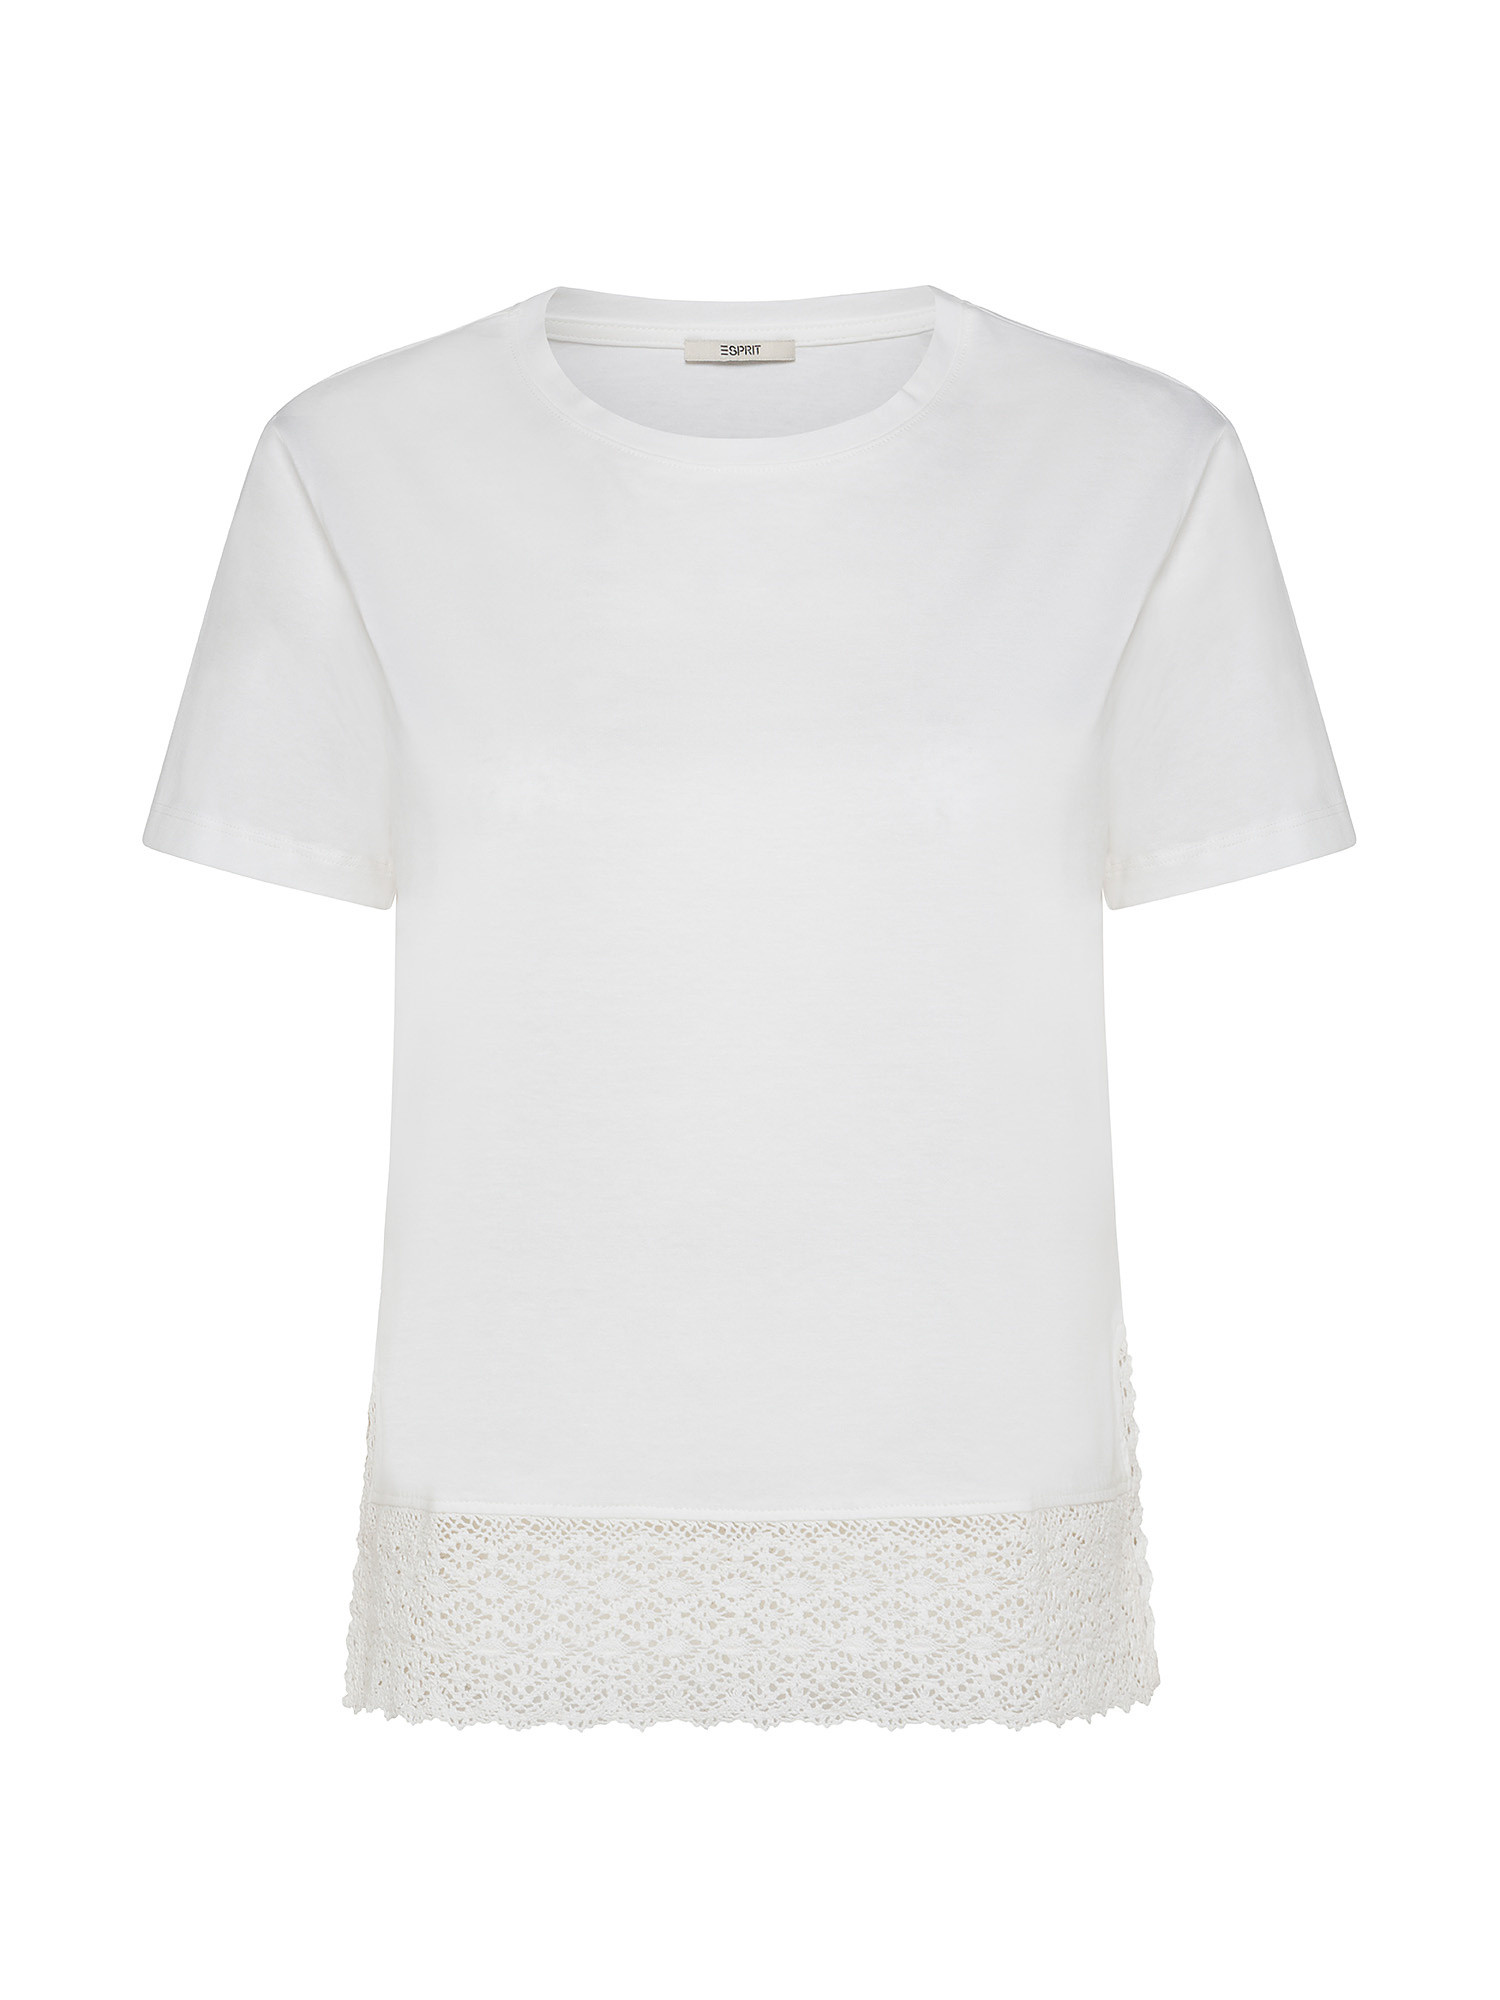 Esprit - T-shirt in cotone, Bianco, large image number 0